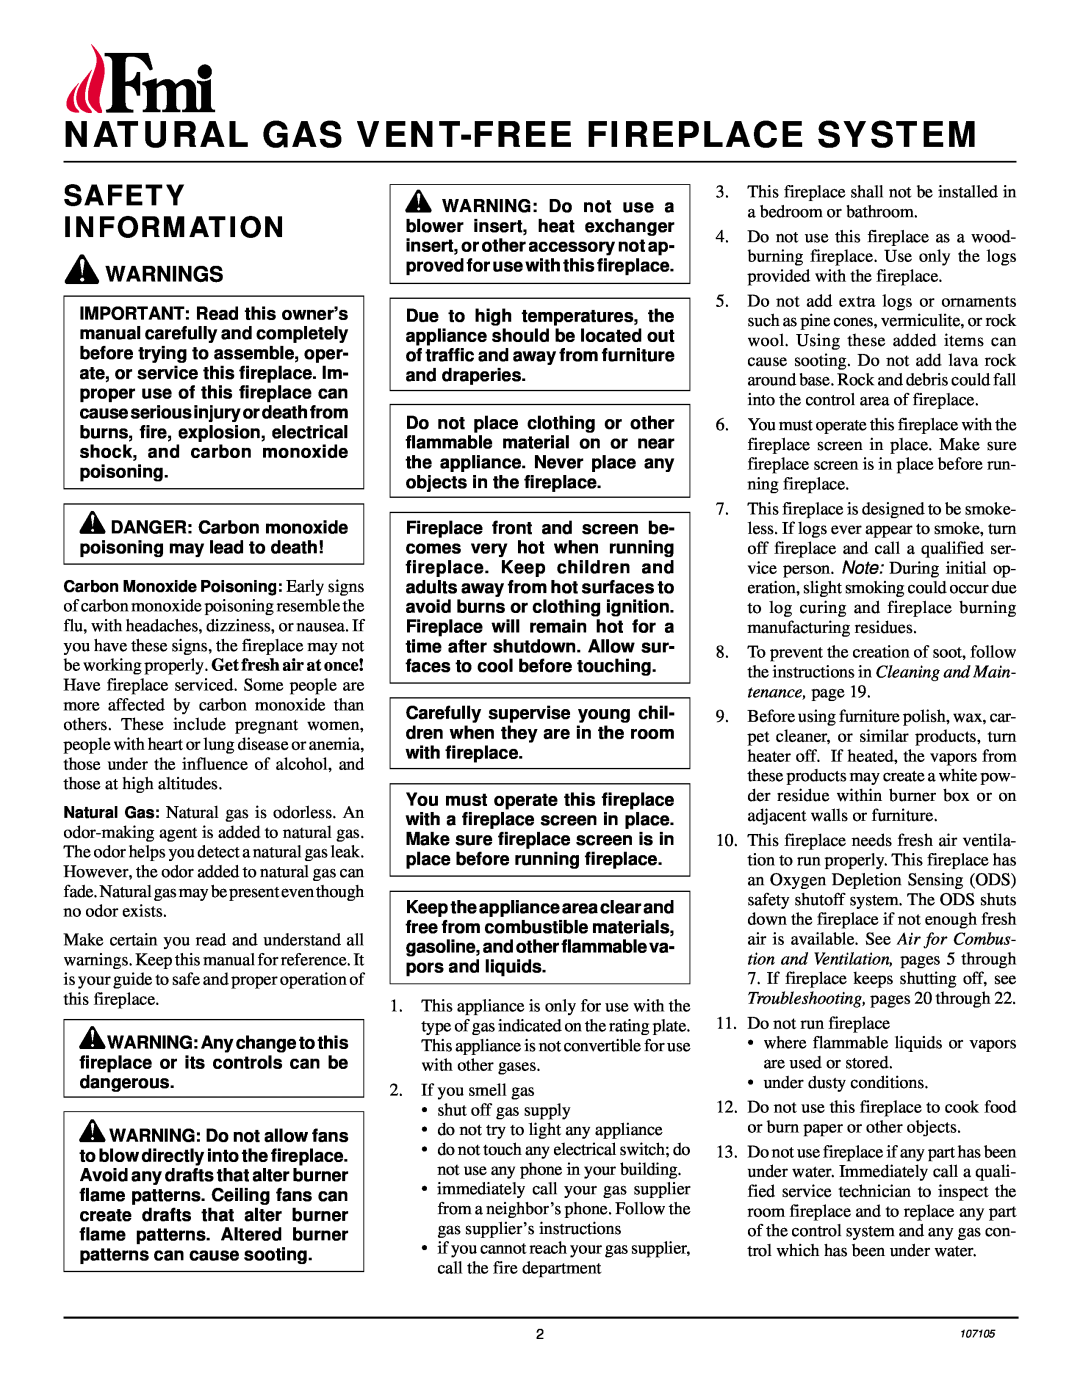 FMI FMH26TN installation manual Natural Gas Vent-Freefireplace System, Safety Information, Warnings 